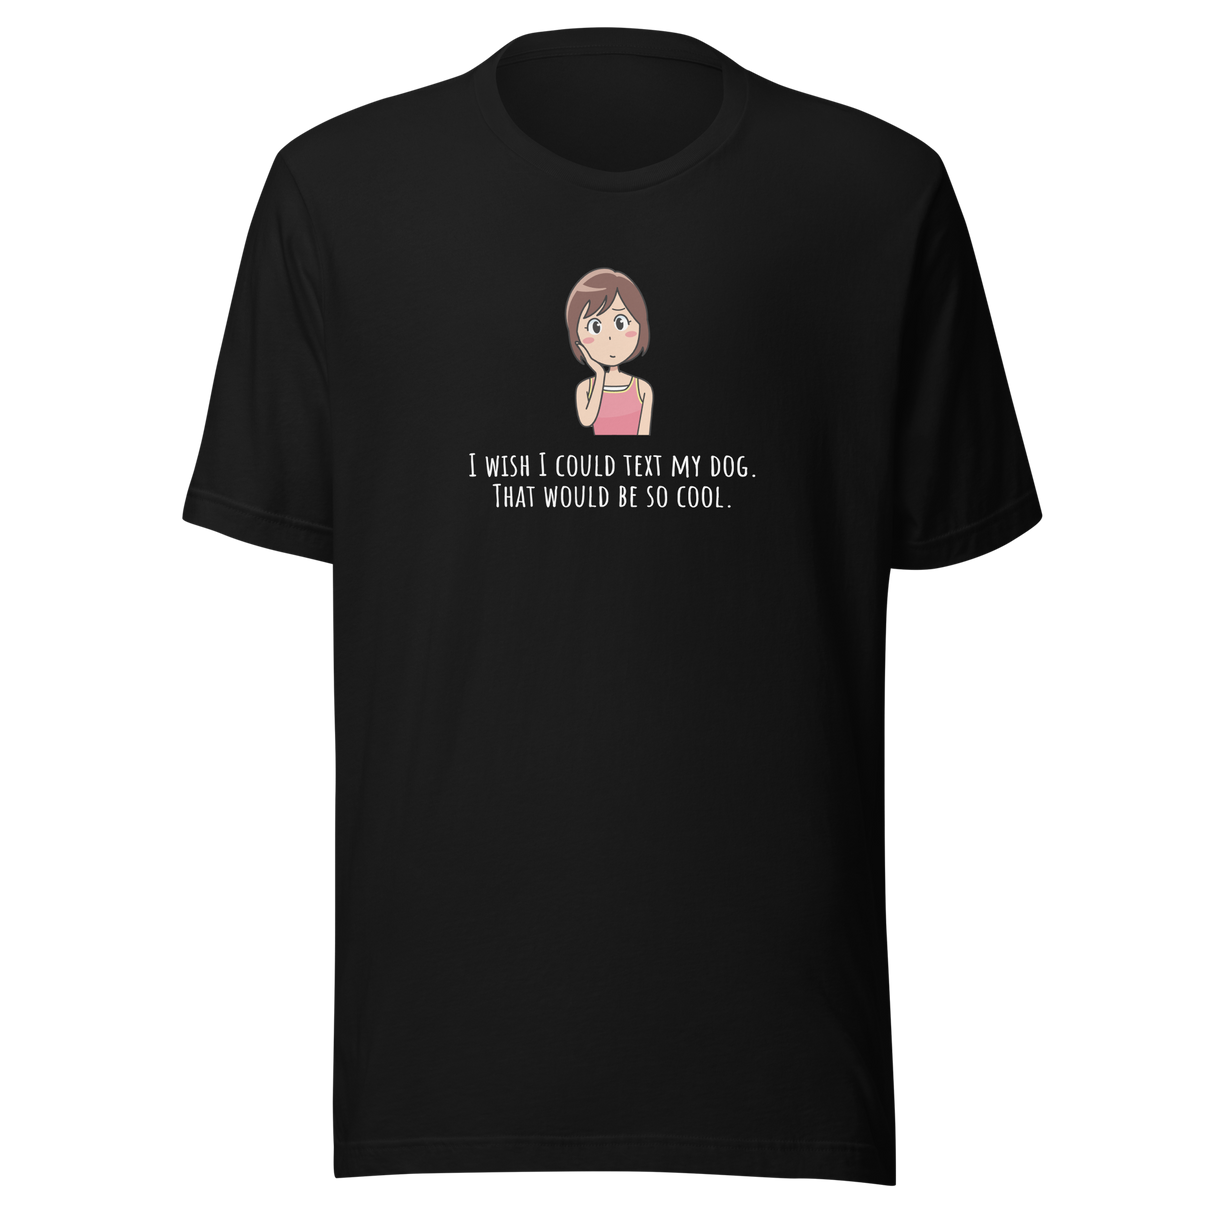 i-wish-i-could-text-my-dog-dog-tee-text-t-shirt-owner-tee-dog-lover-t-shirt-dog-mom-tee#color_black